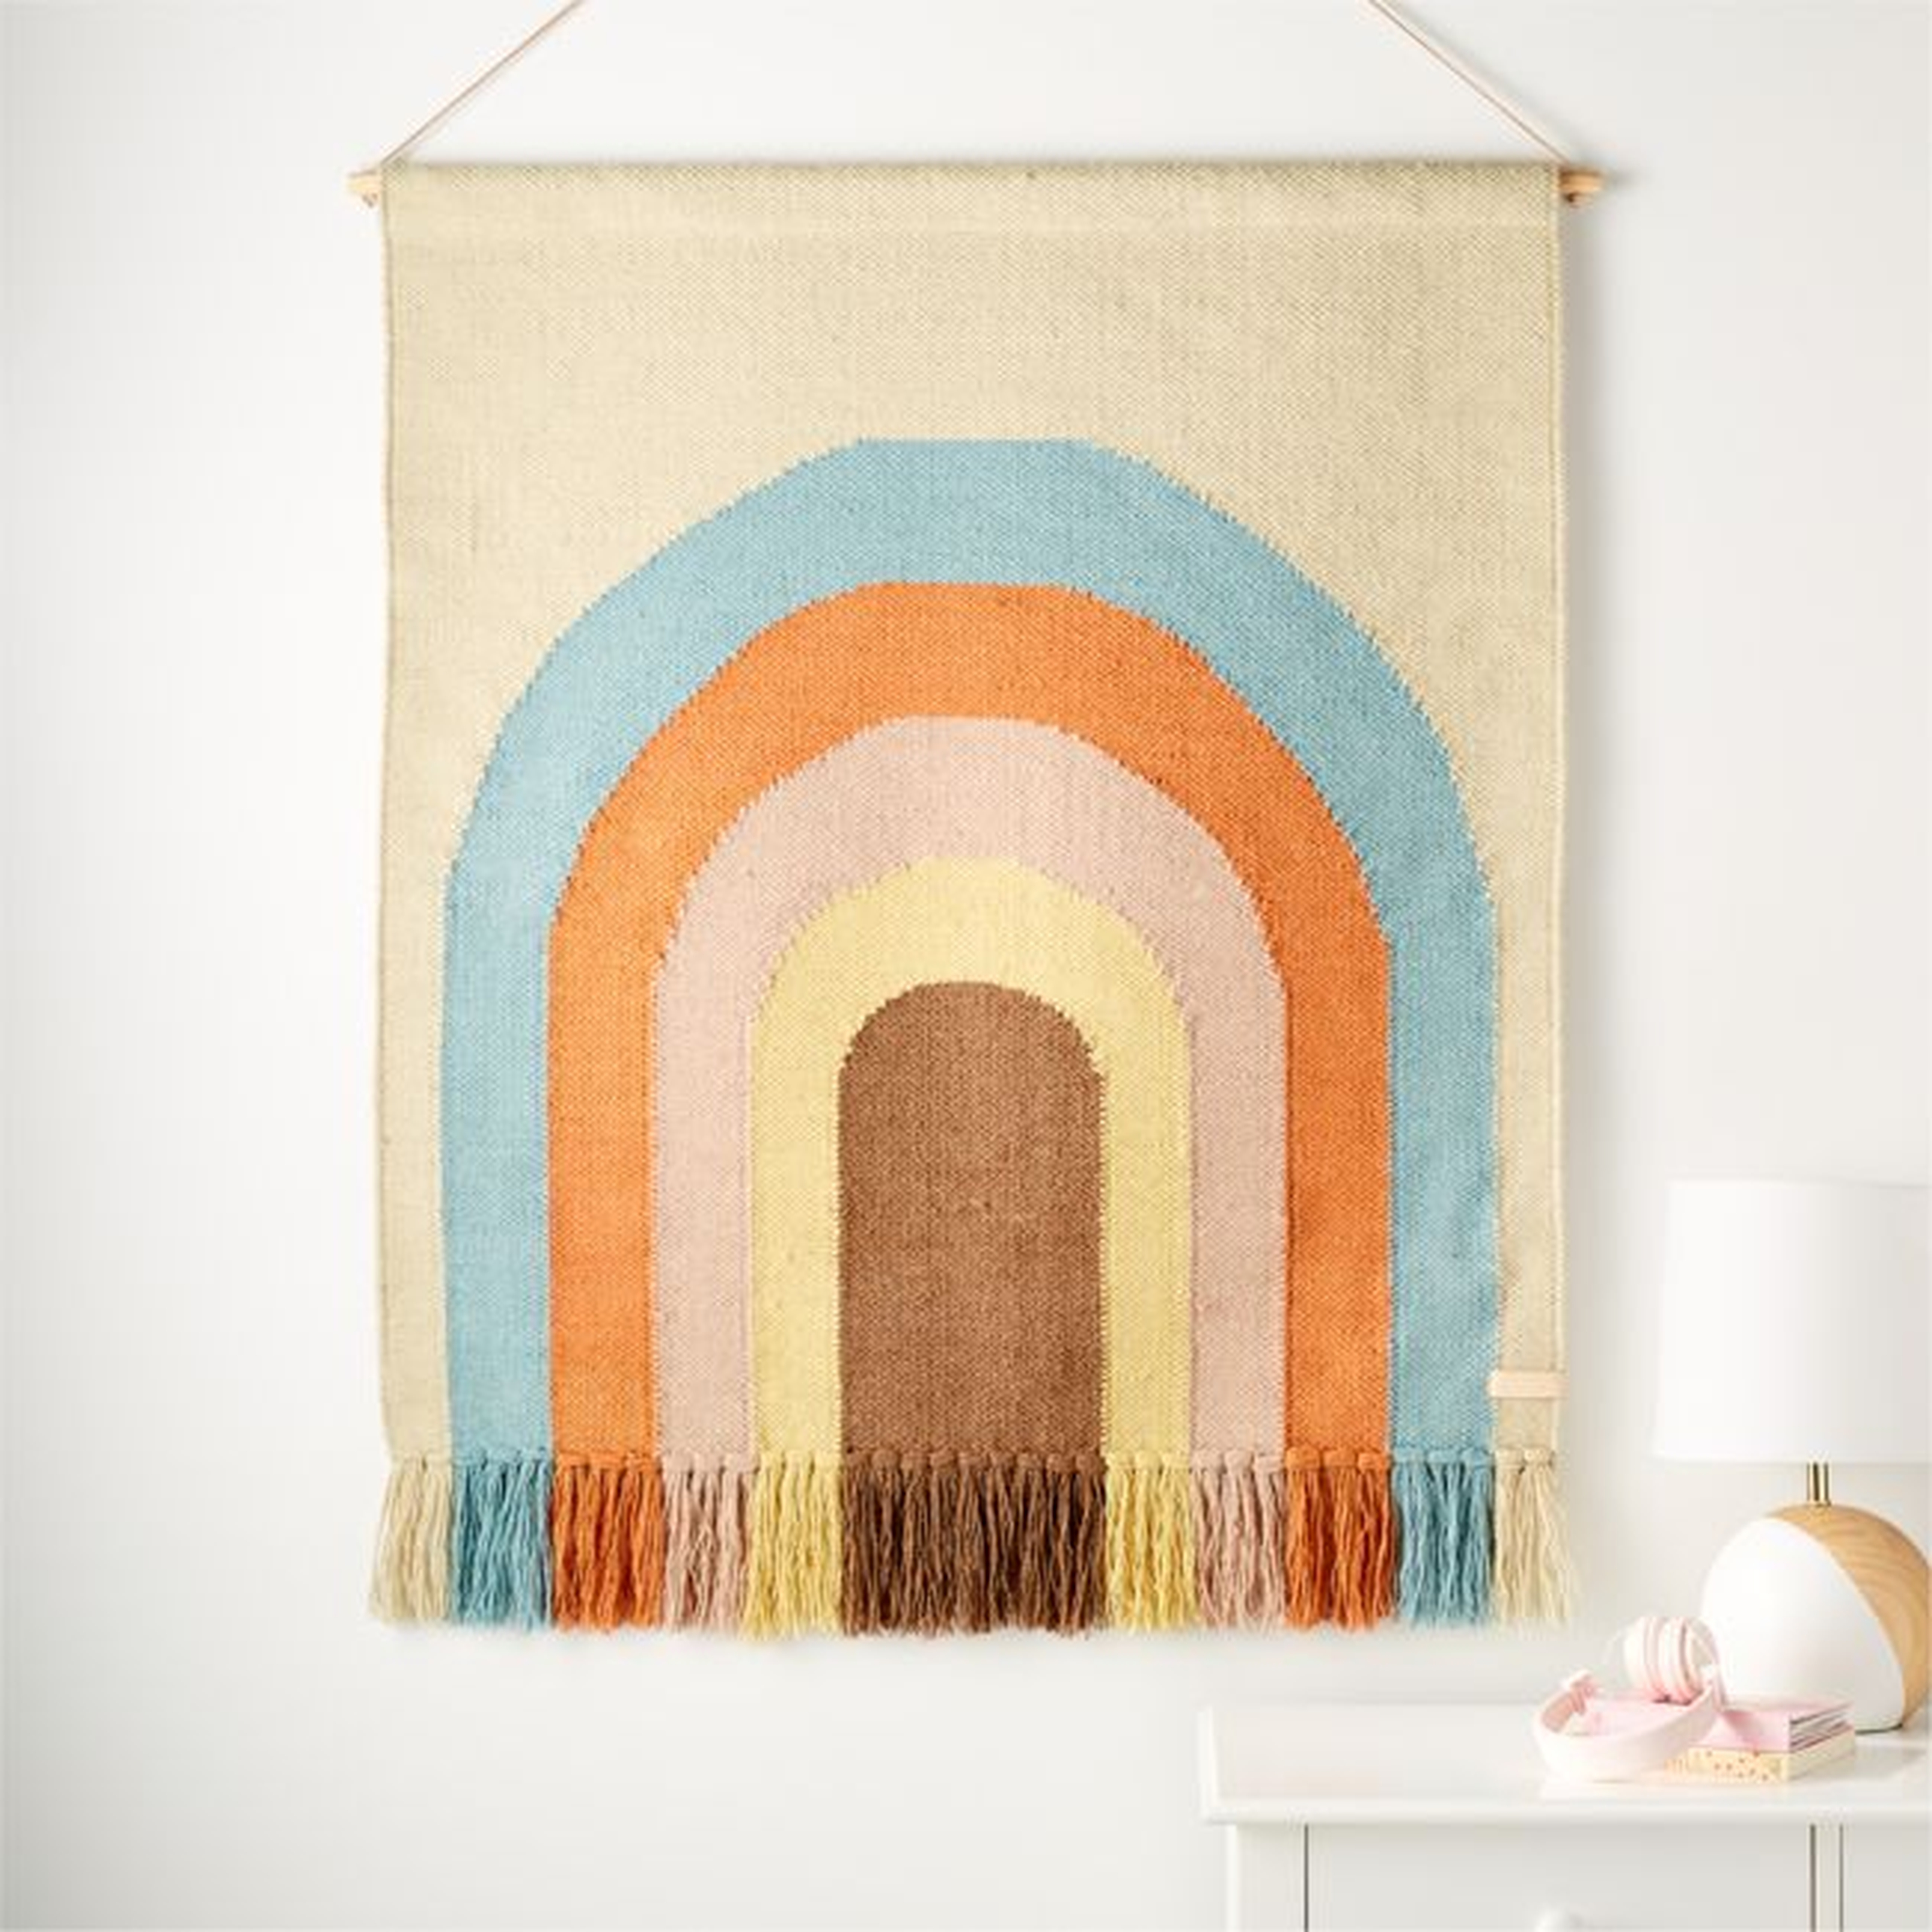 Follow the Rainbow Wall Rug - Crate and Barrel